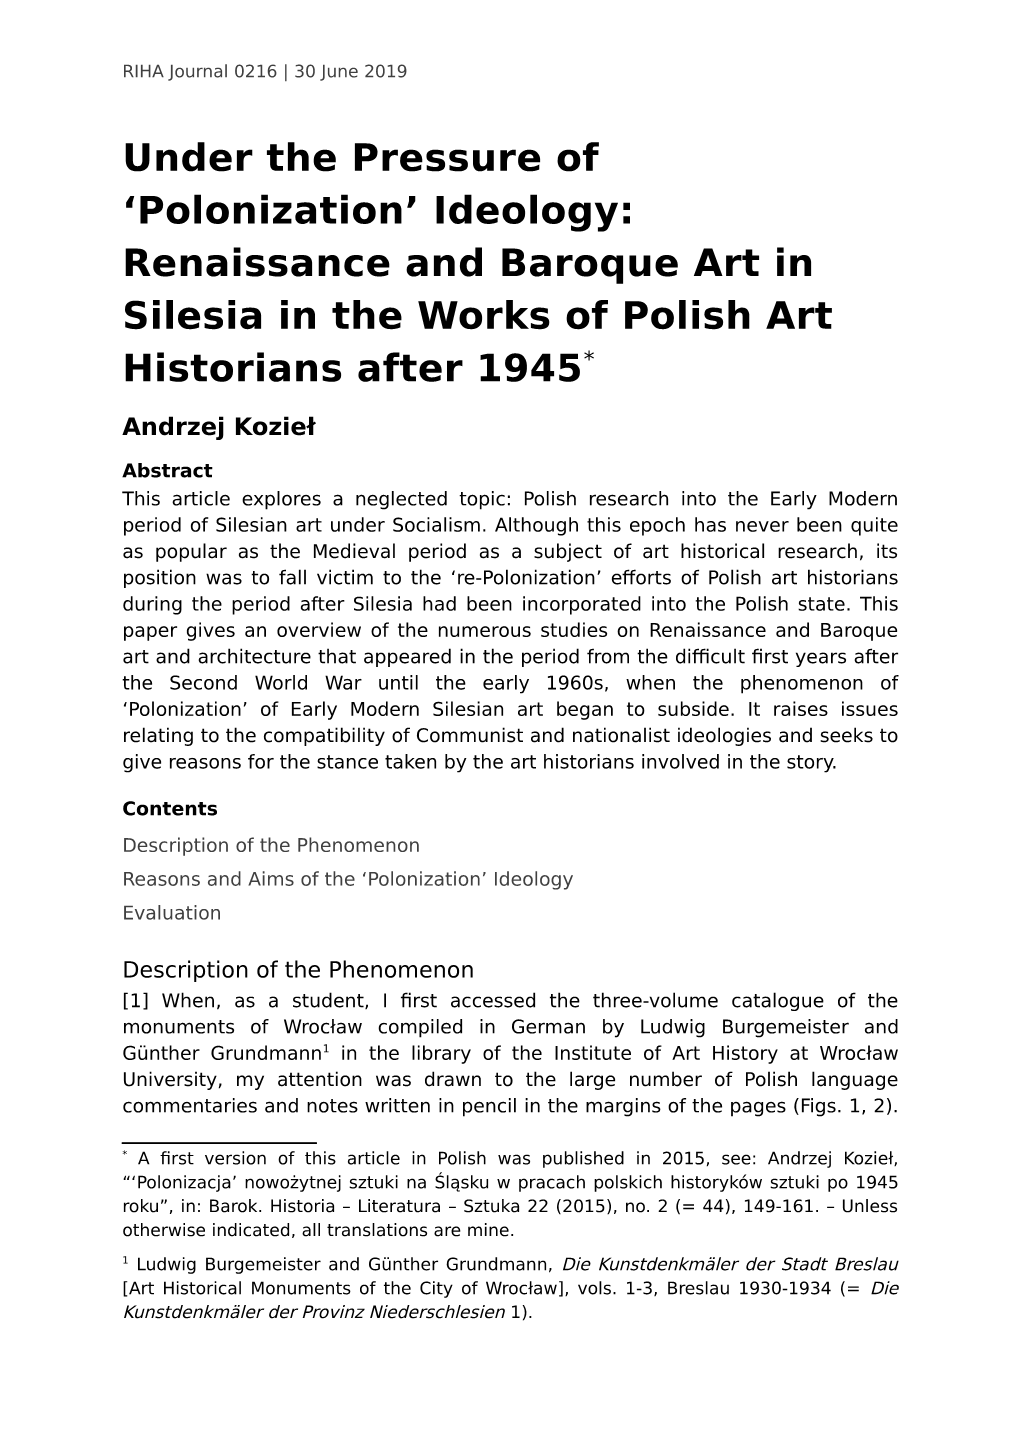 Ideology: Renaissance and Baroque Art in Silesia in the Works of Polish Art Historians After 1945*